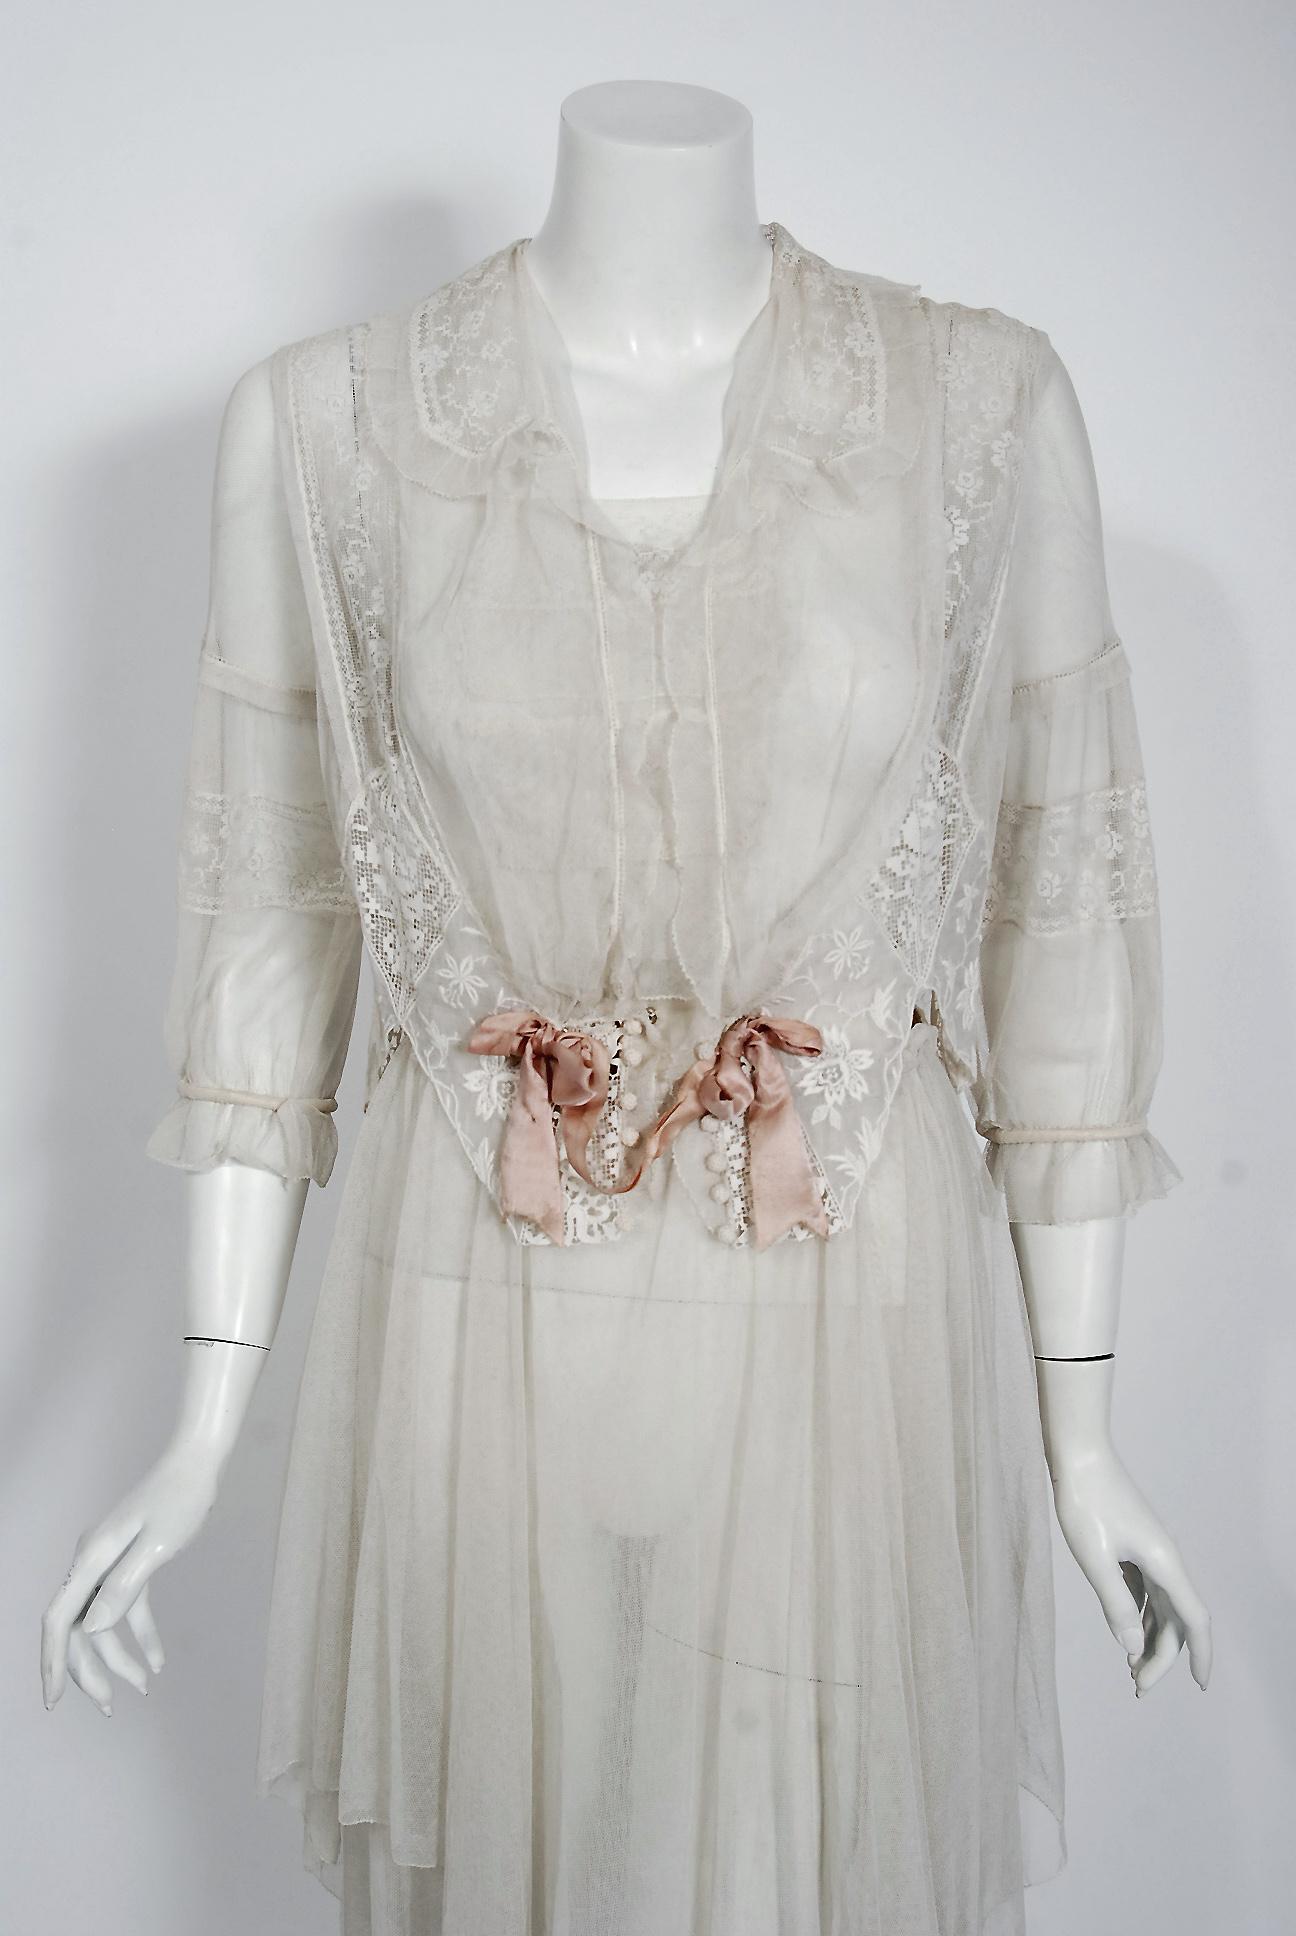 Romantic white dresses from the early 20th century are perennial favorites and this one is a show-stopper. The garment's complete couture style is so modern; the fine fabrics are a treasure trove of needle art. The dress is made up of four different